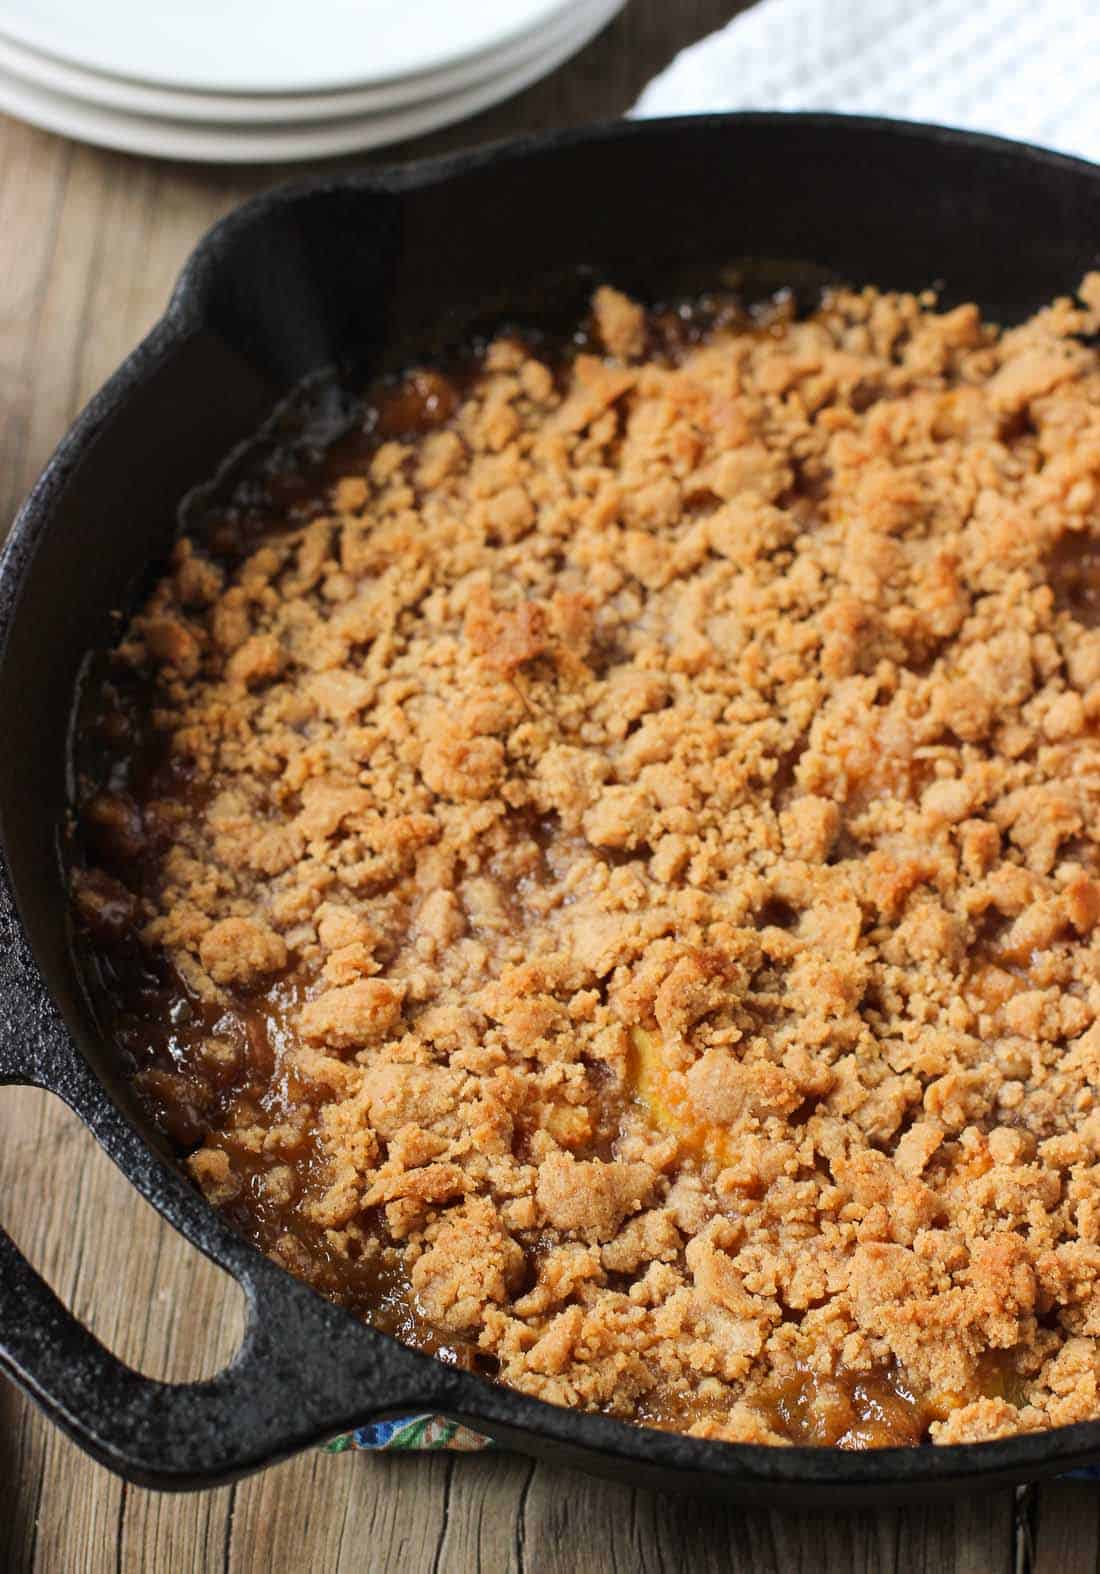 A whole pan of peach crisp right out of the oven